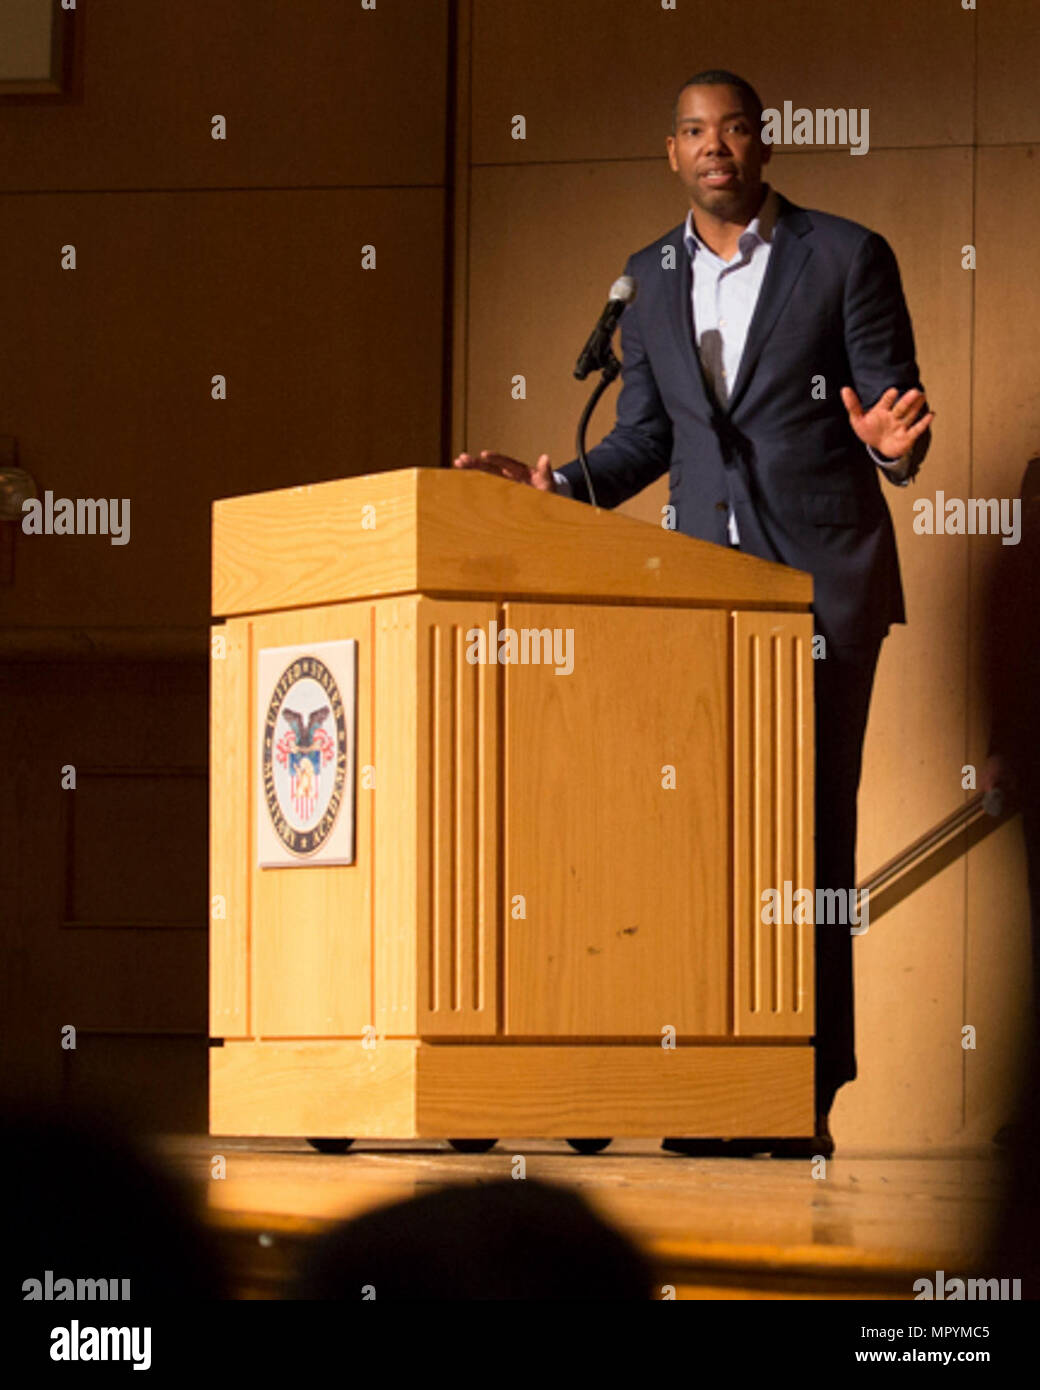 Author Ta-Nehisi Coates addresses U.S. Military Academy cadets and faculty in Robinson Auditorium at West Point during the Second Annual Zengerle Family Lecture in Arts and Humanities, April 12, 2017.  The lecture was established by Joe Zengerle in part to counter insularity and forward equality by having cadets develop self-awareness by encountering productive conflict and differing views. Stock Photo